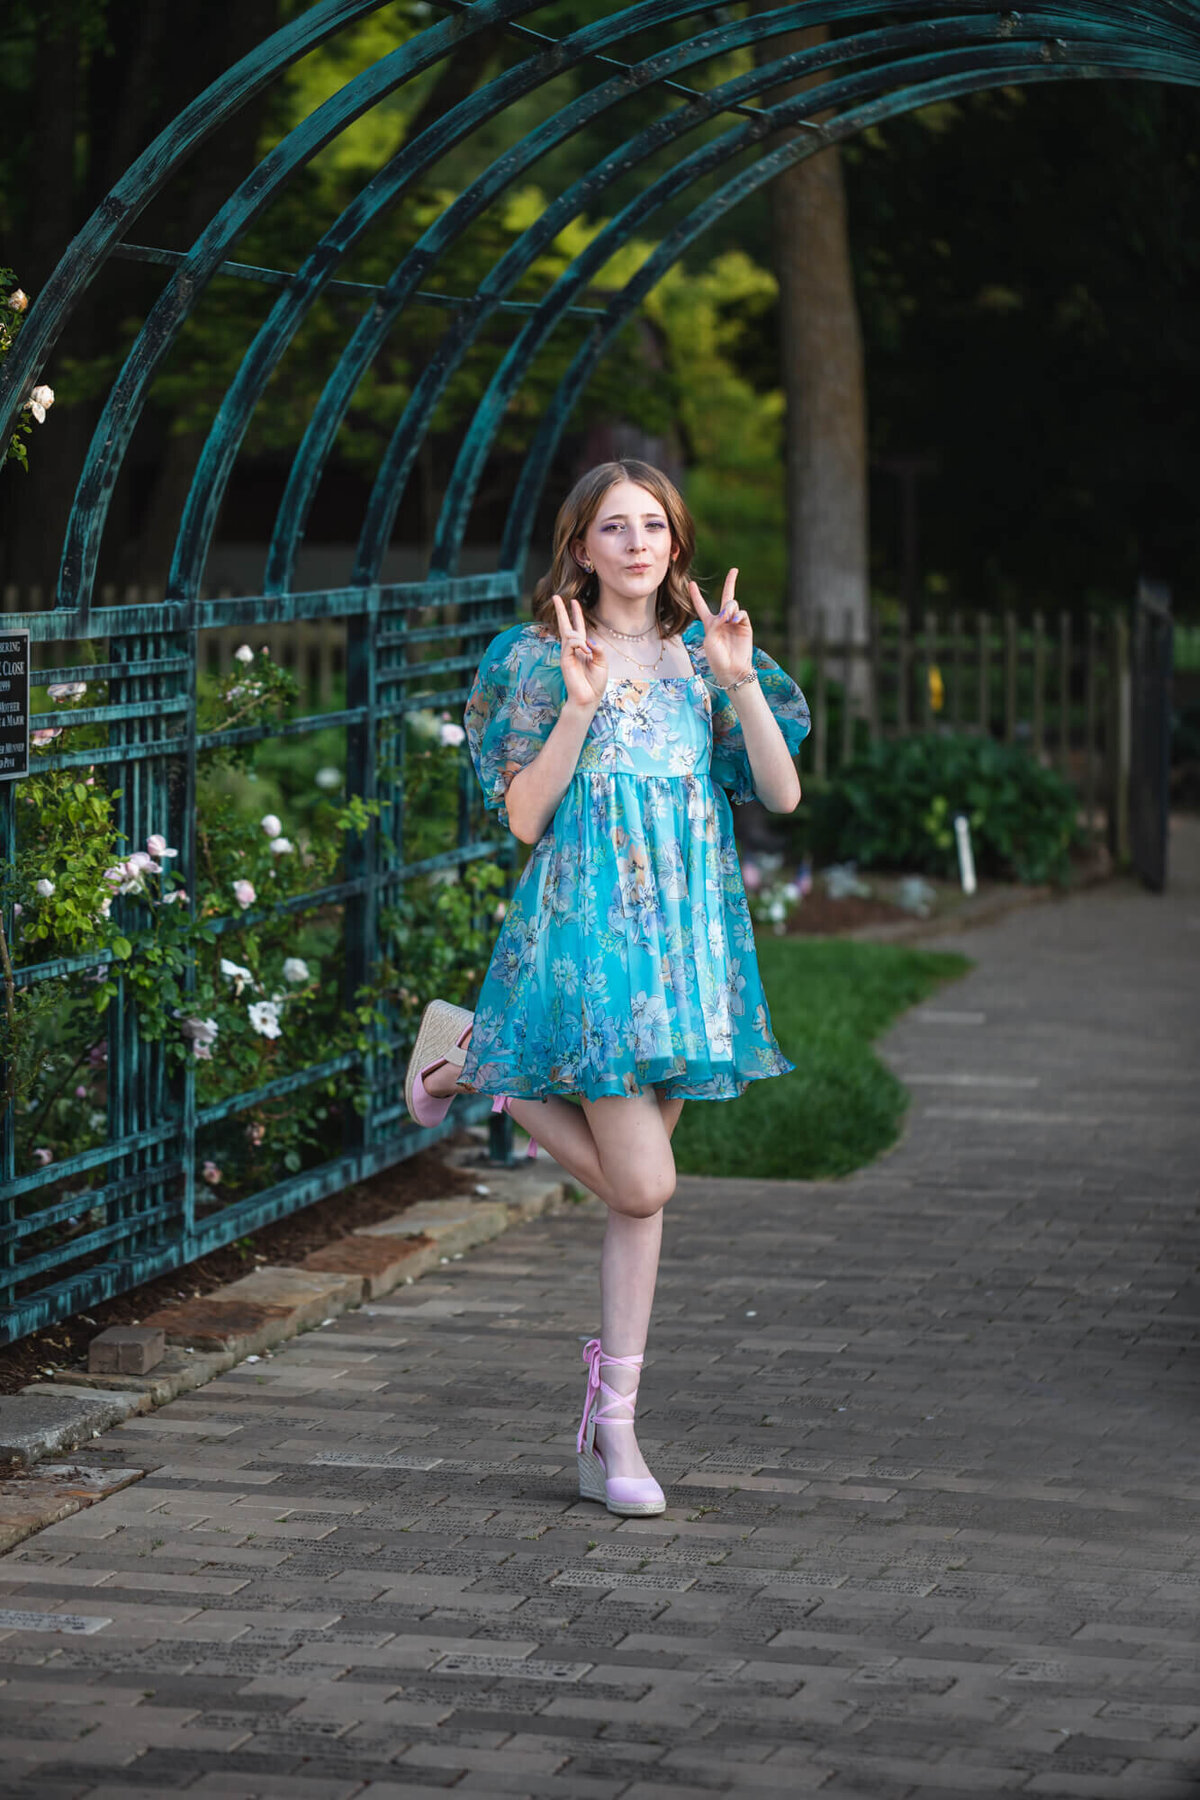 Fun portrait of a teenage girl in a blue flora dress doing a fun pose on one leg and peace signs in a garden. Captured by Springfield, MO teen photographer Dynae Levingston.